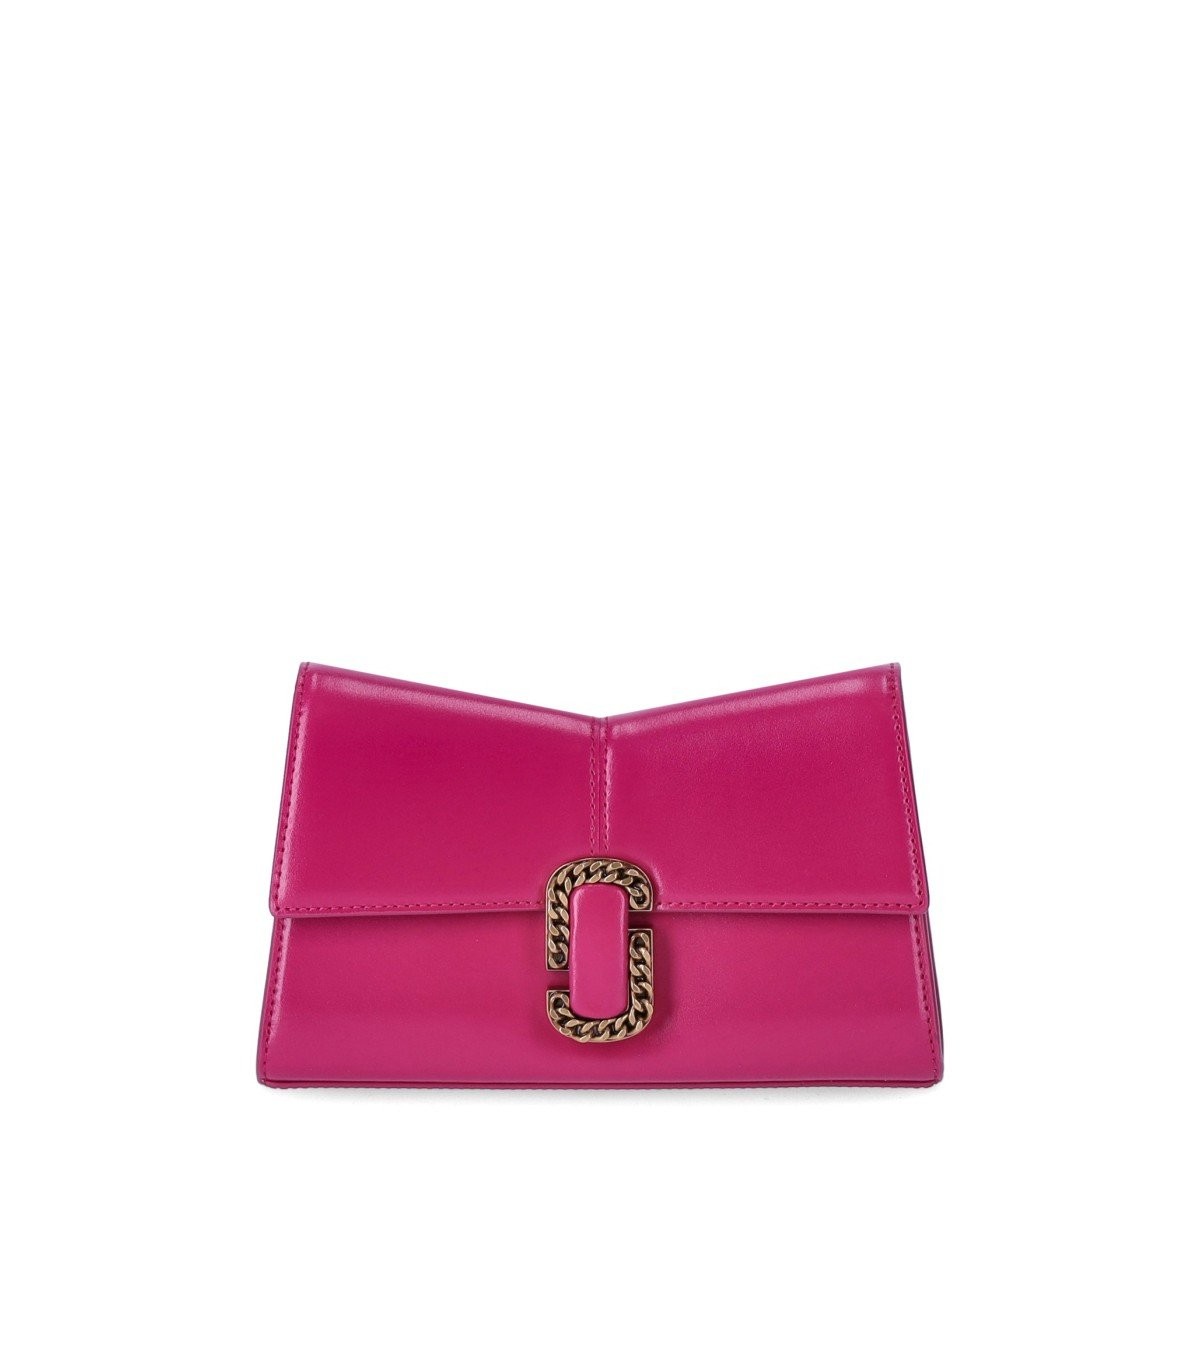 MARC JACOBS THE ST. MARC LIPSTICK PINK CLUTCH